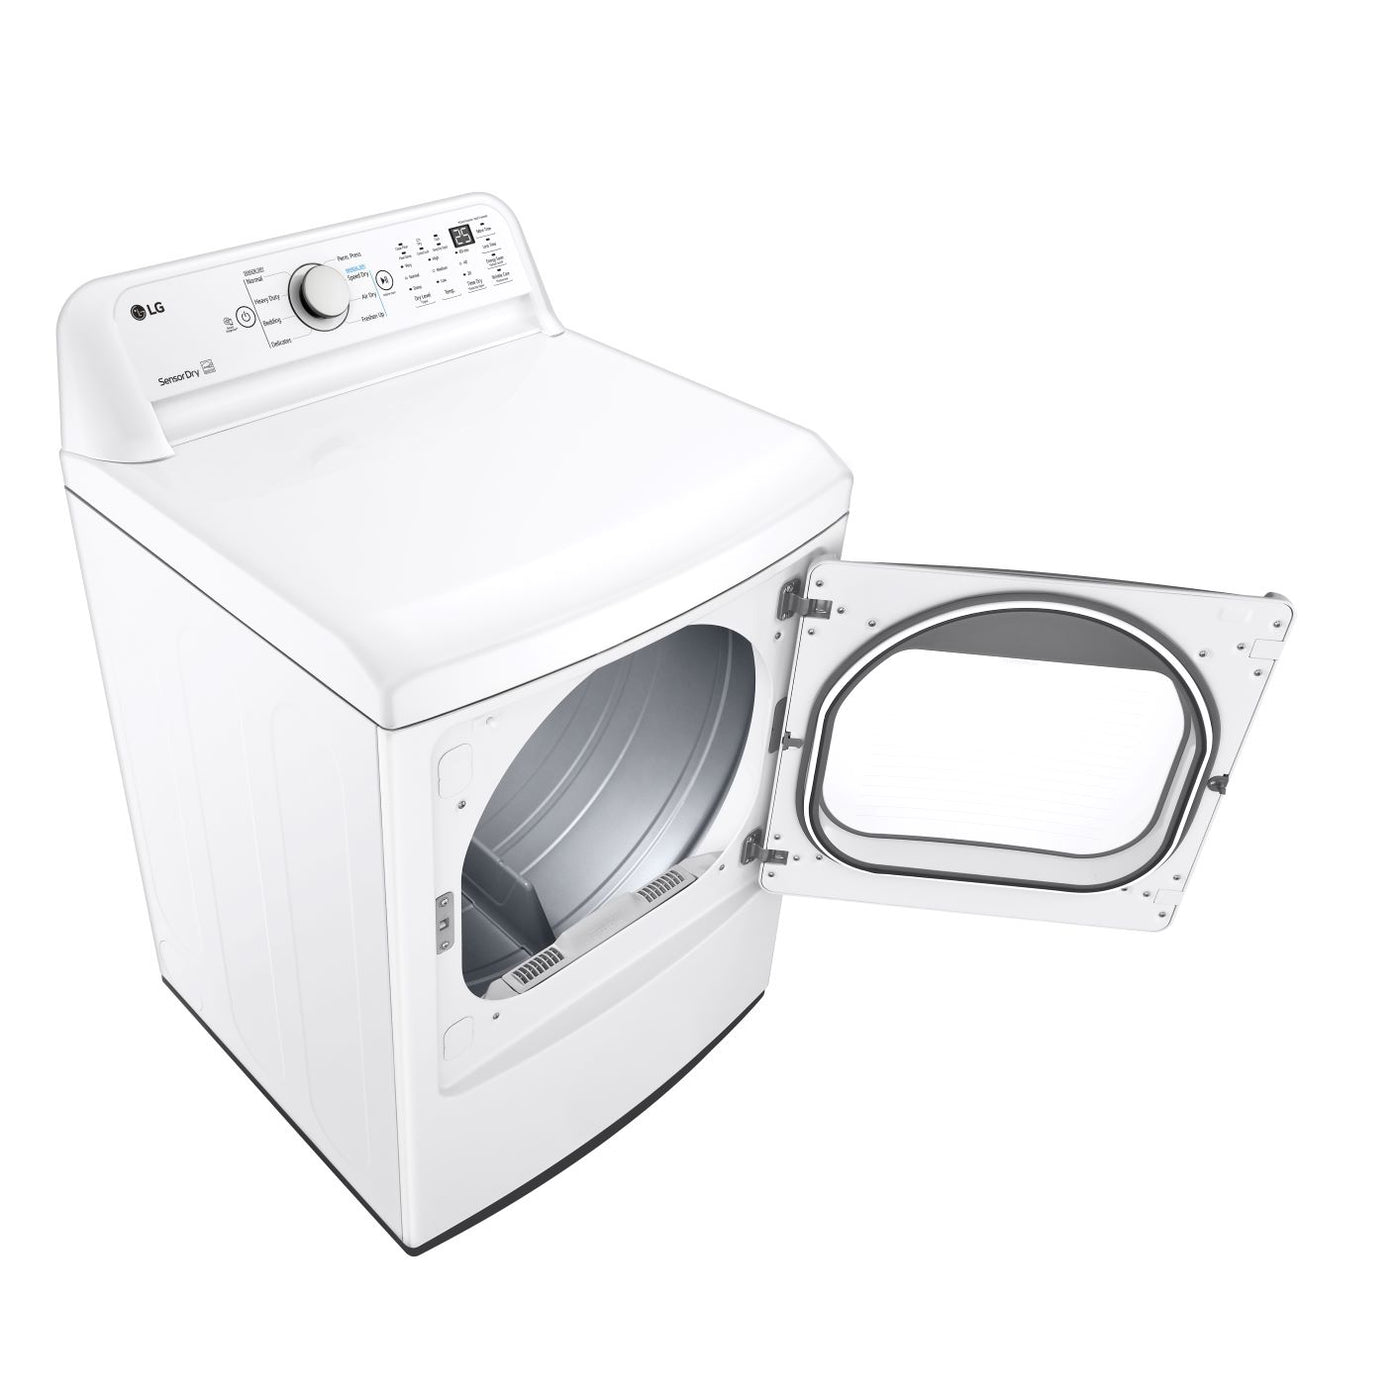 LG White Electric Dryer with Sensor Dry (7.3 Cu. Ft.) - DLE7150W